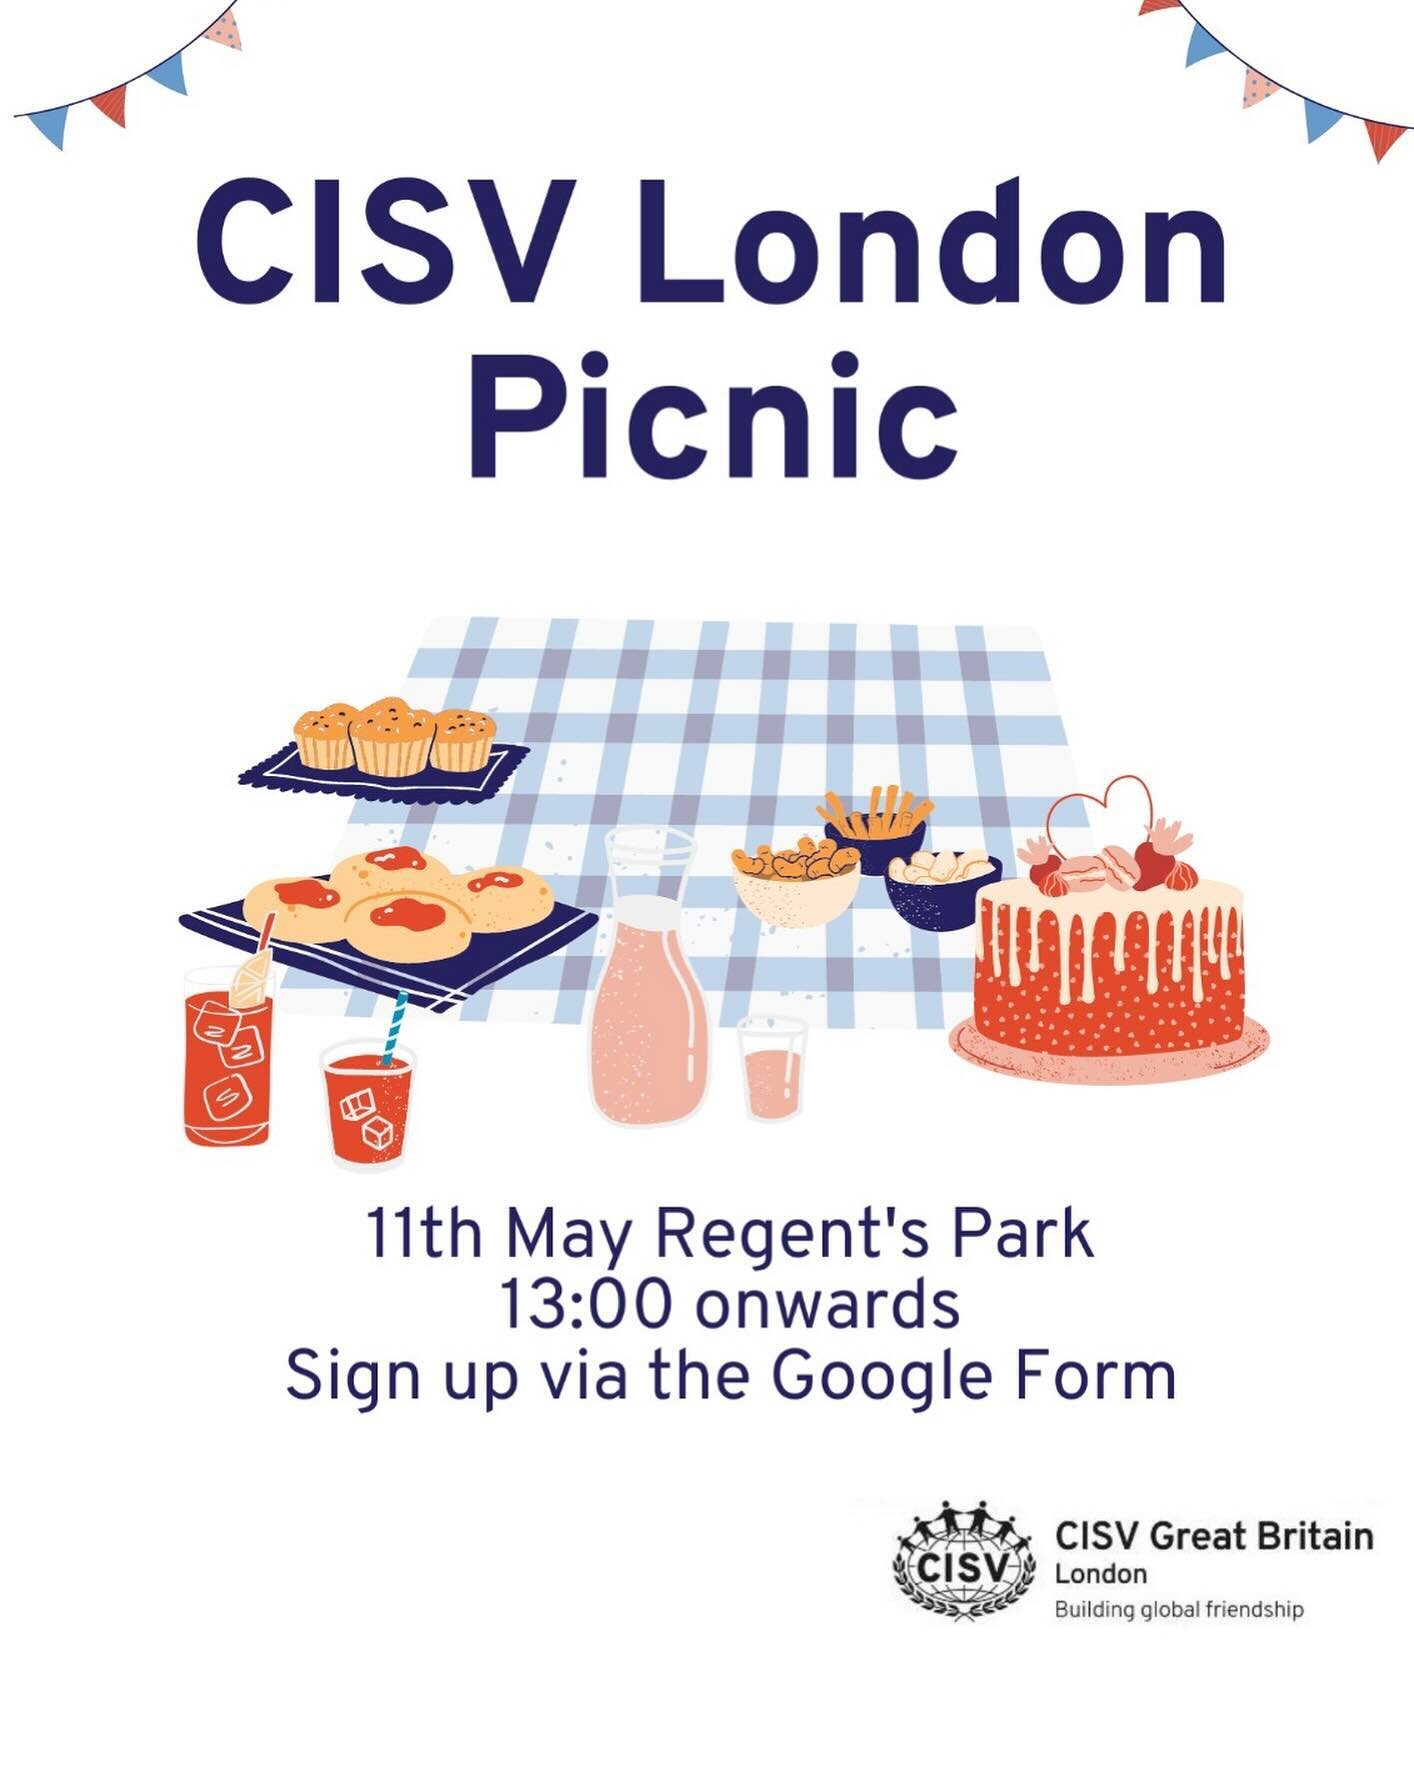 🧺 🍰 CISV London annual picnic 🧺 🍰 

11th May 13:00-15:00

All ages, everyone is welcome! There will be activities organised by the Junior Branch. 

Sign up via our bio!

#cisv #cisvlondon #gocisvlondon #cisvlondonjb #cisvgb #cisvgreatbritain #lon